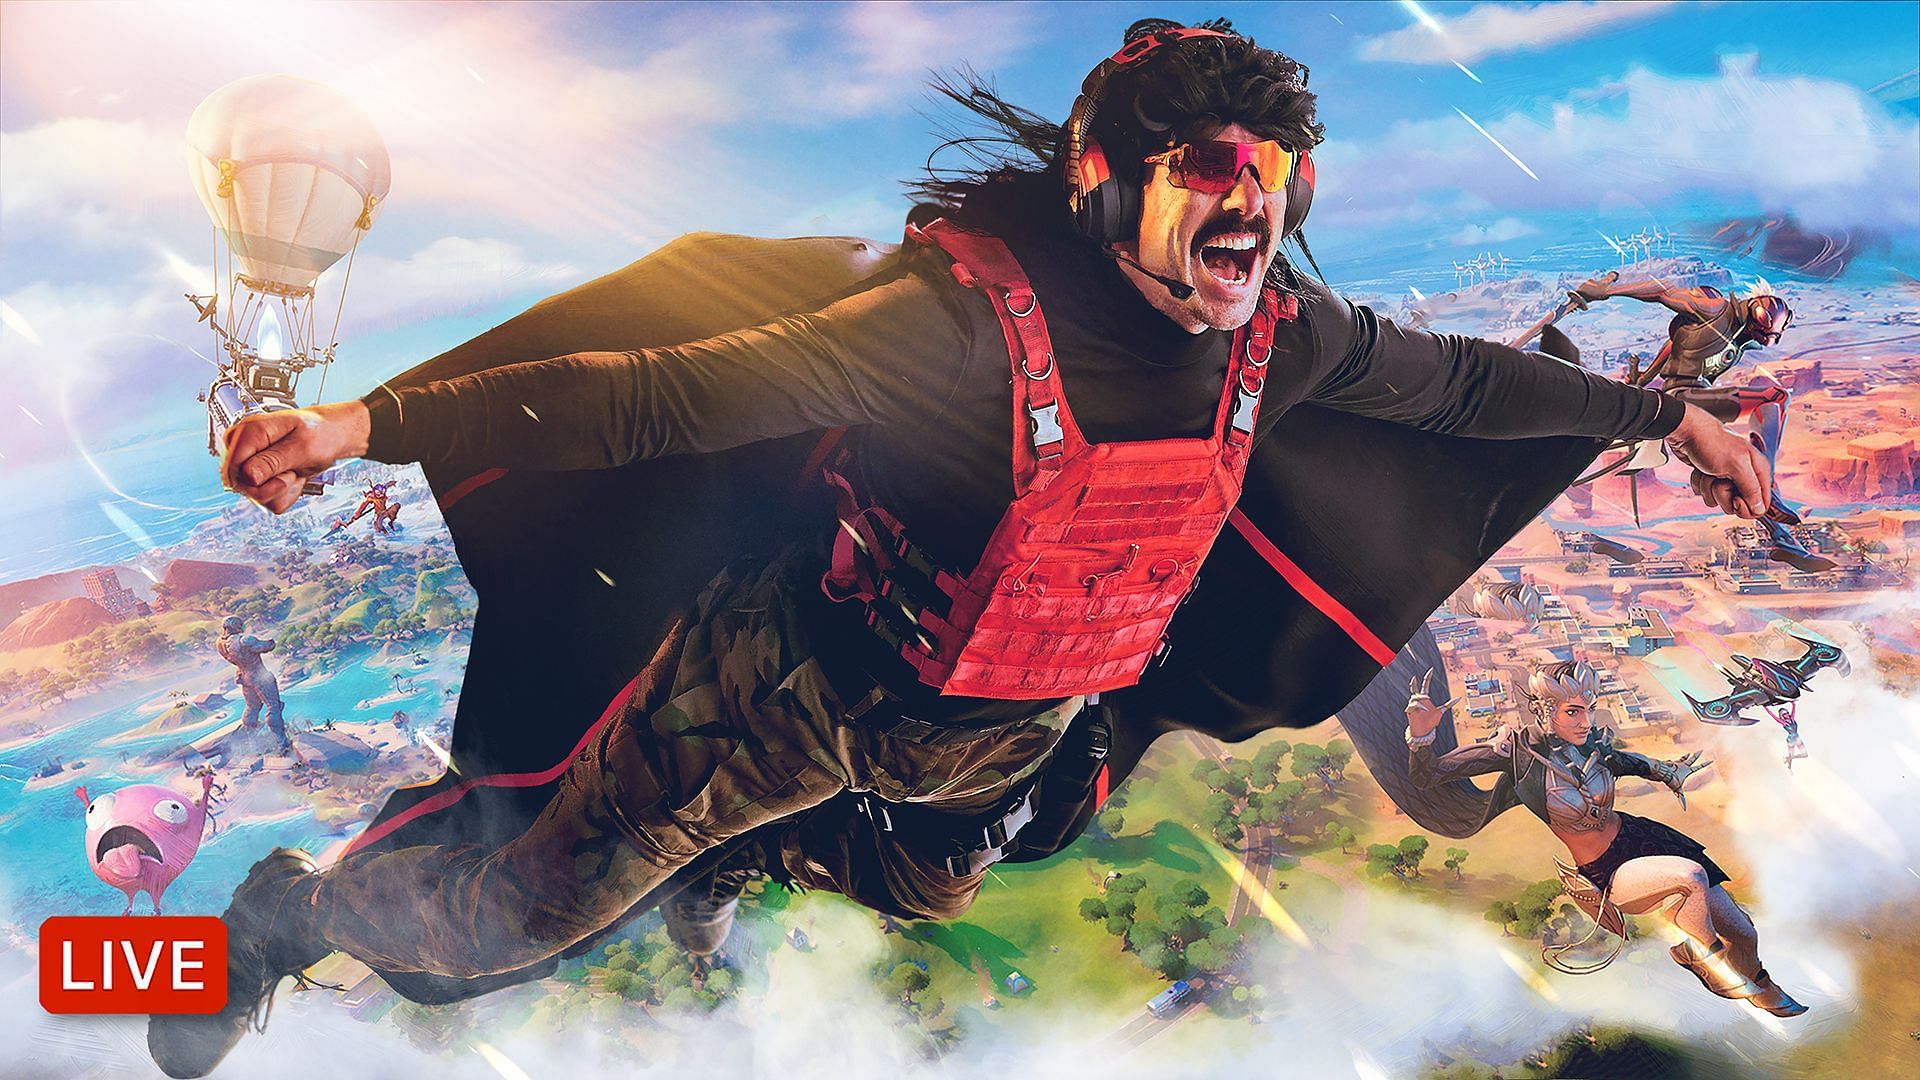 Dr DisRespect wins a game of Fortnite Squads with a team of random kids (Image via Dr DisRespect/Twitter)